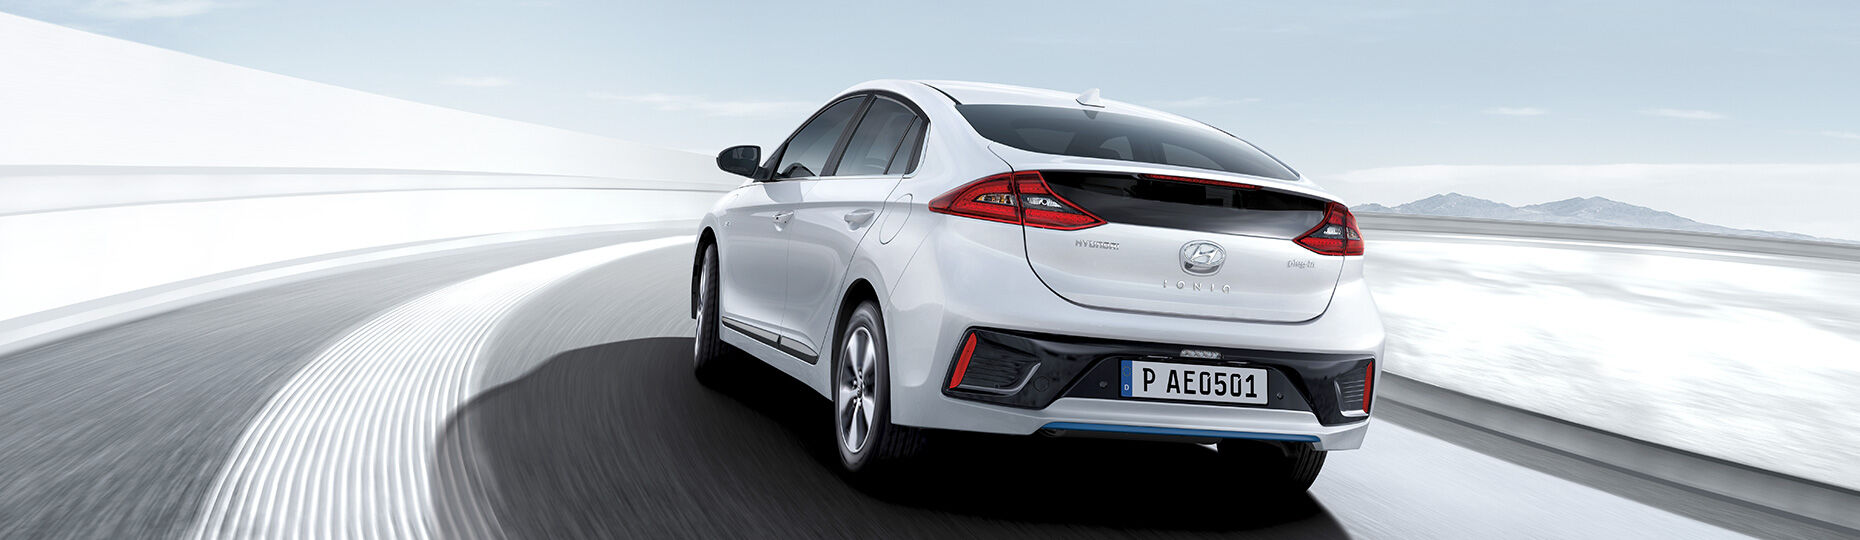 Side front view of white Ioniq plug-in Hybrid